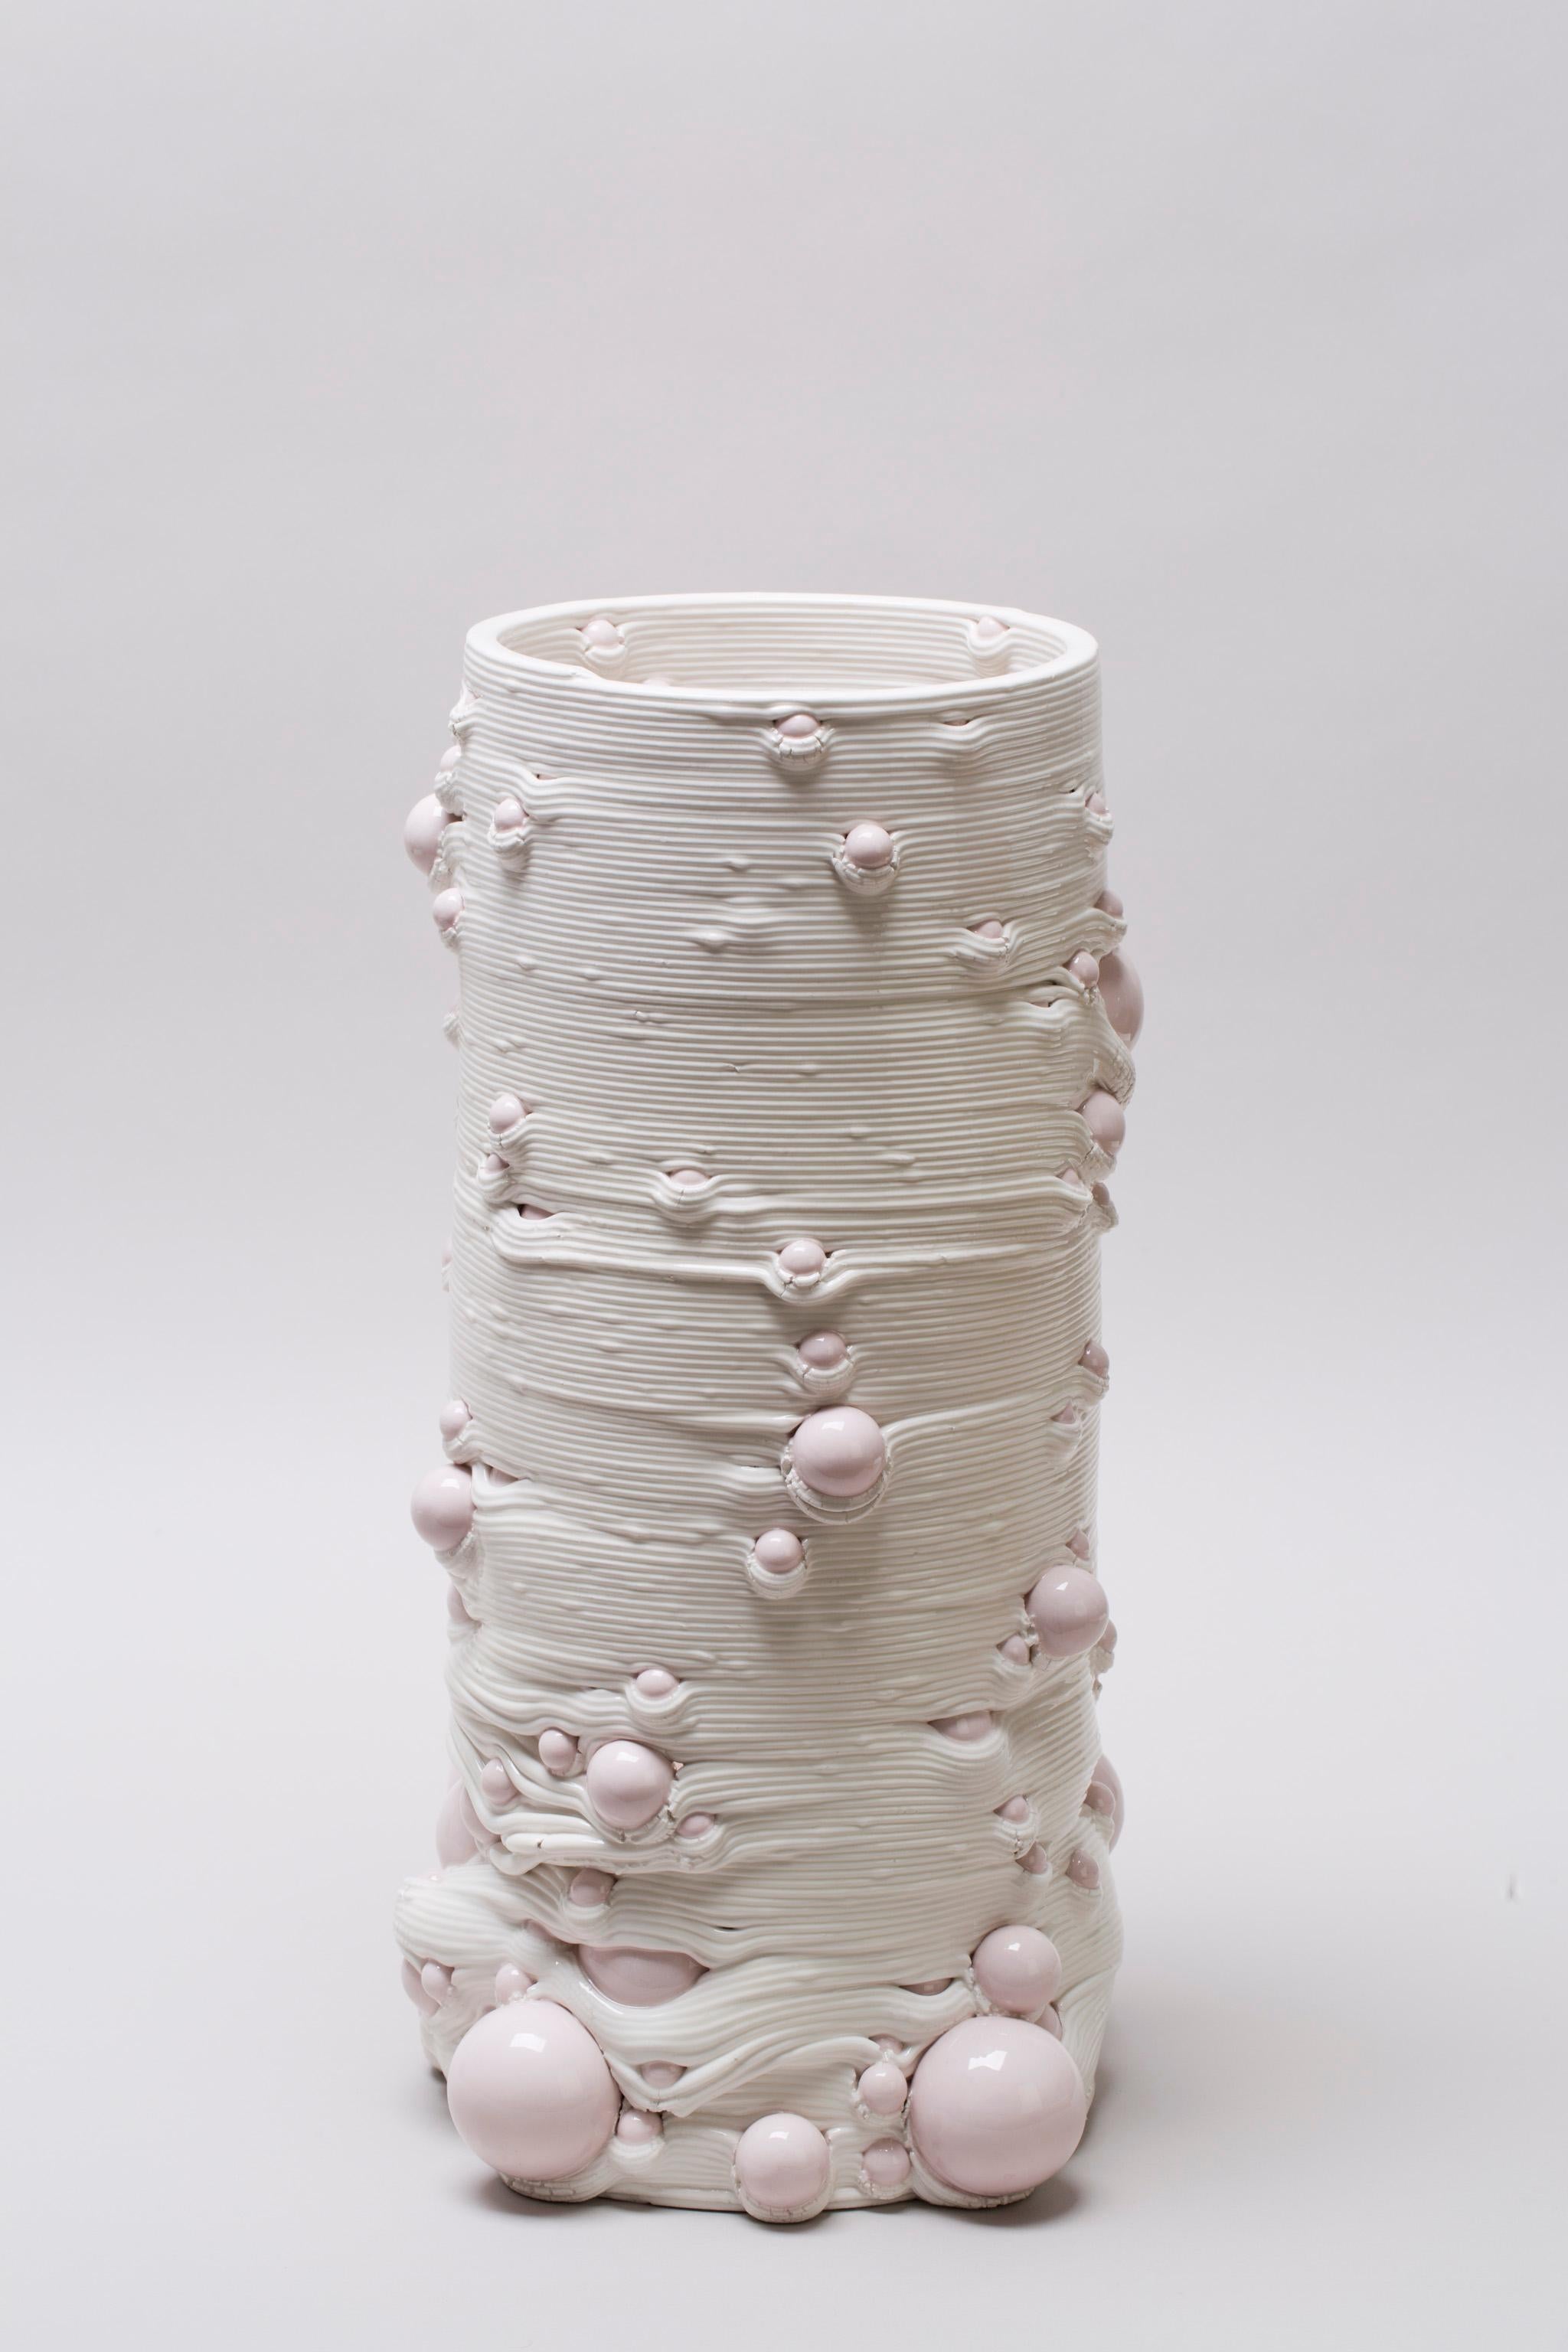 White 3D Printed Ceramic Sculptural Vase Italy Contemporary, 21st Century For Sale 2